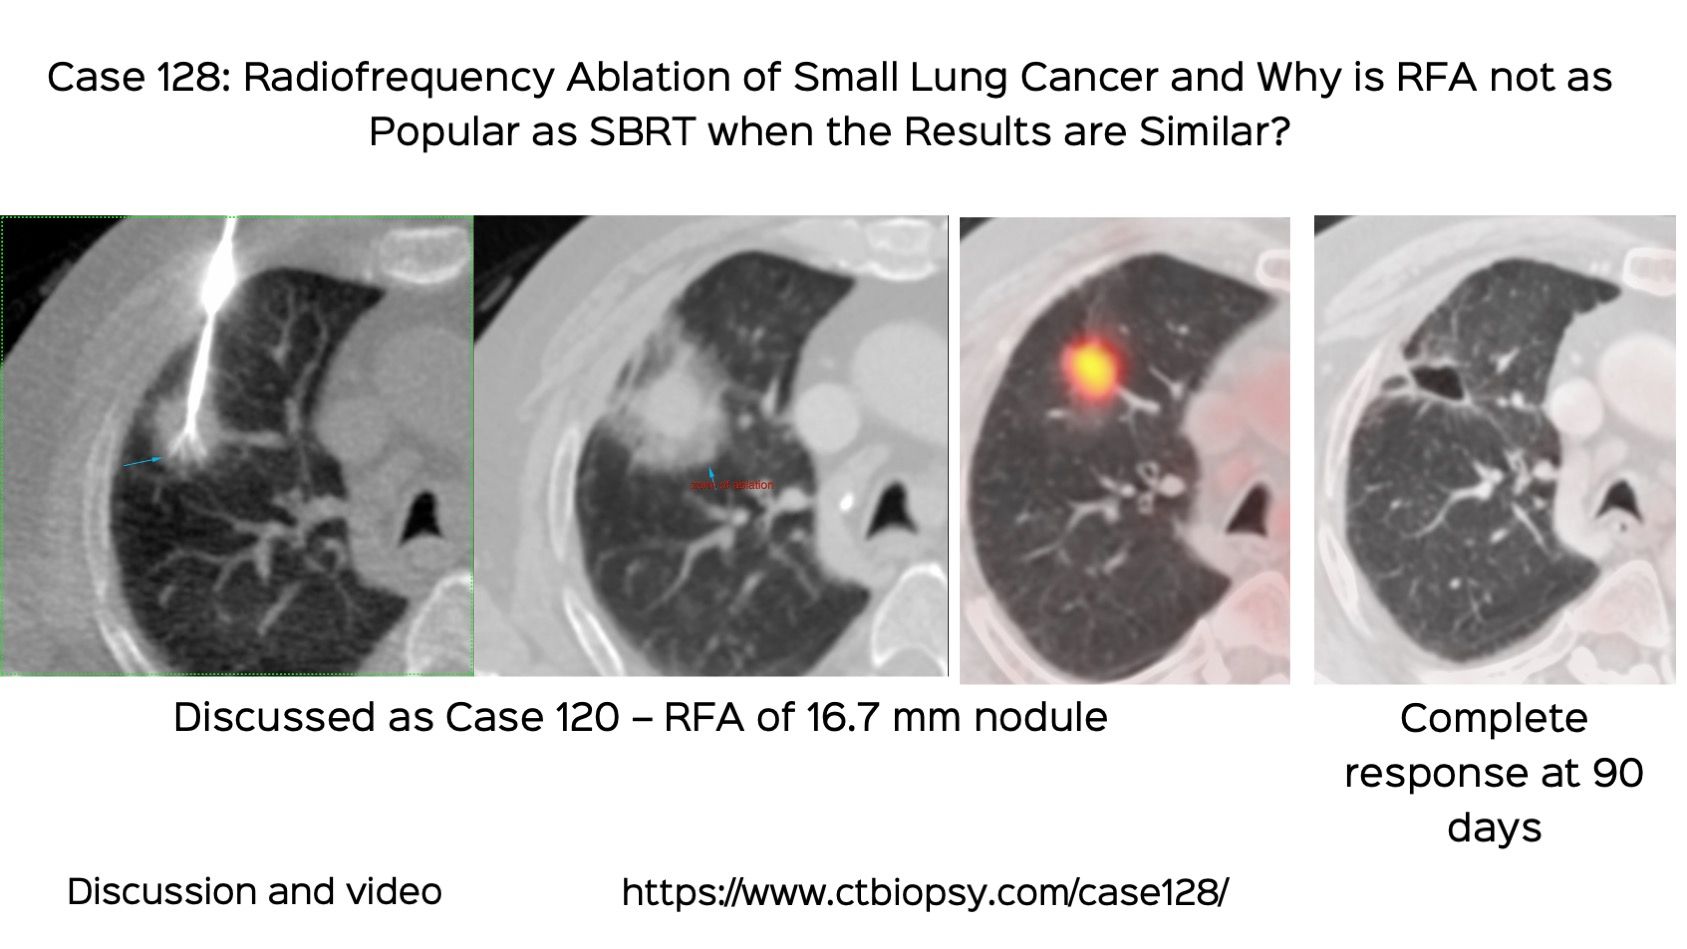 Case 128: Radiofrequency Ablation (RFA) of Small Lung Cancer...and Why is RFA not as Popular as SBRT when the Results are Similar?